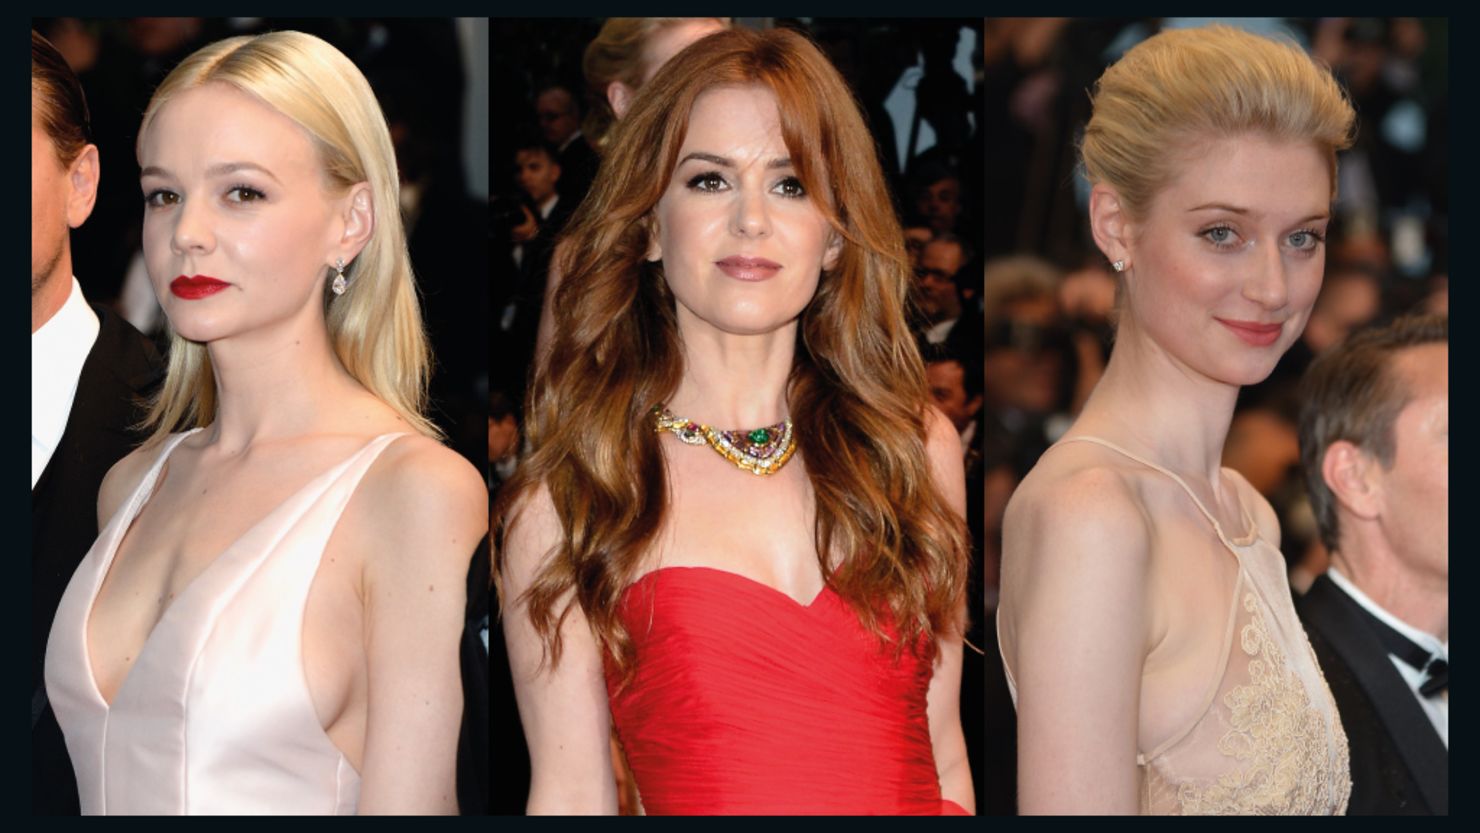 Actresses (L-R) Carey Mulligan, Isla Fisher and Elizabeth Debicki as they arrive for the screening of "The Great Gatsby" at the 2013 Cannes Film Festival. 